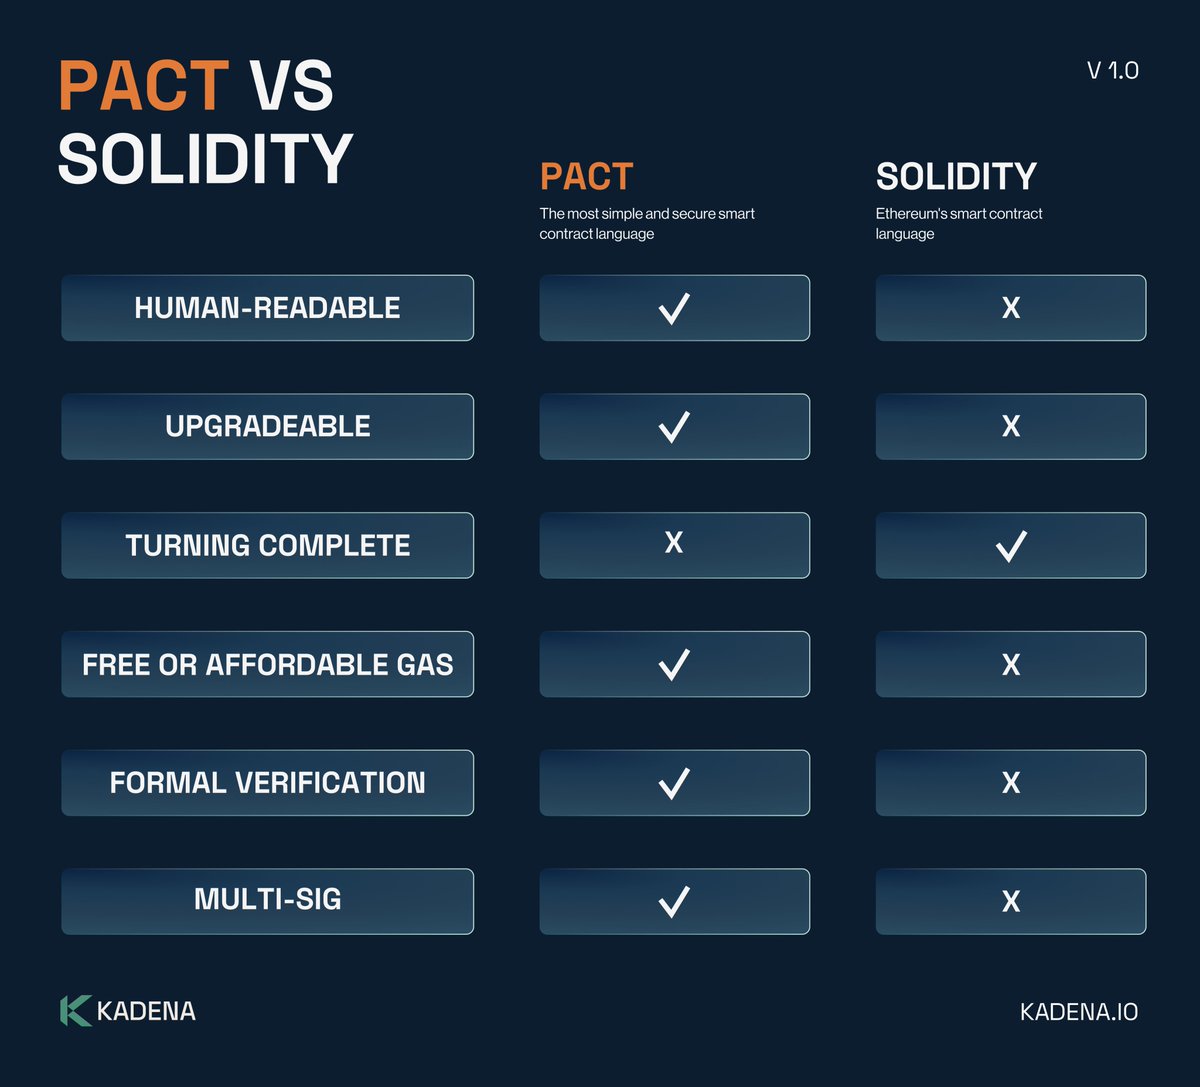 While #Solidity made smart contract programming popular, #Pact makes smart contracts much safer and accessible with: 📃 Human readable smart contracts ⛽️ Low to no gas fees 🔒 Unparalleled security & much more! Pact was created with humans in mind, not just developers.